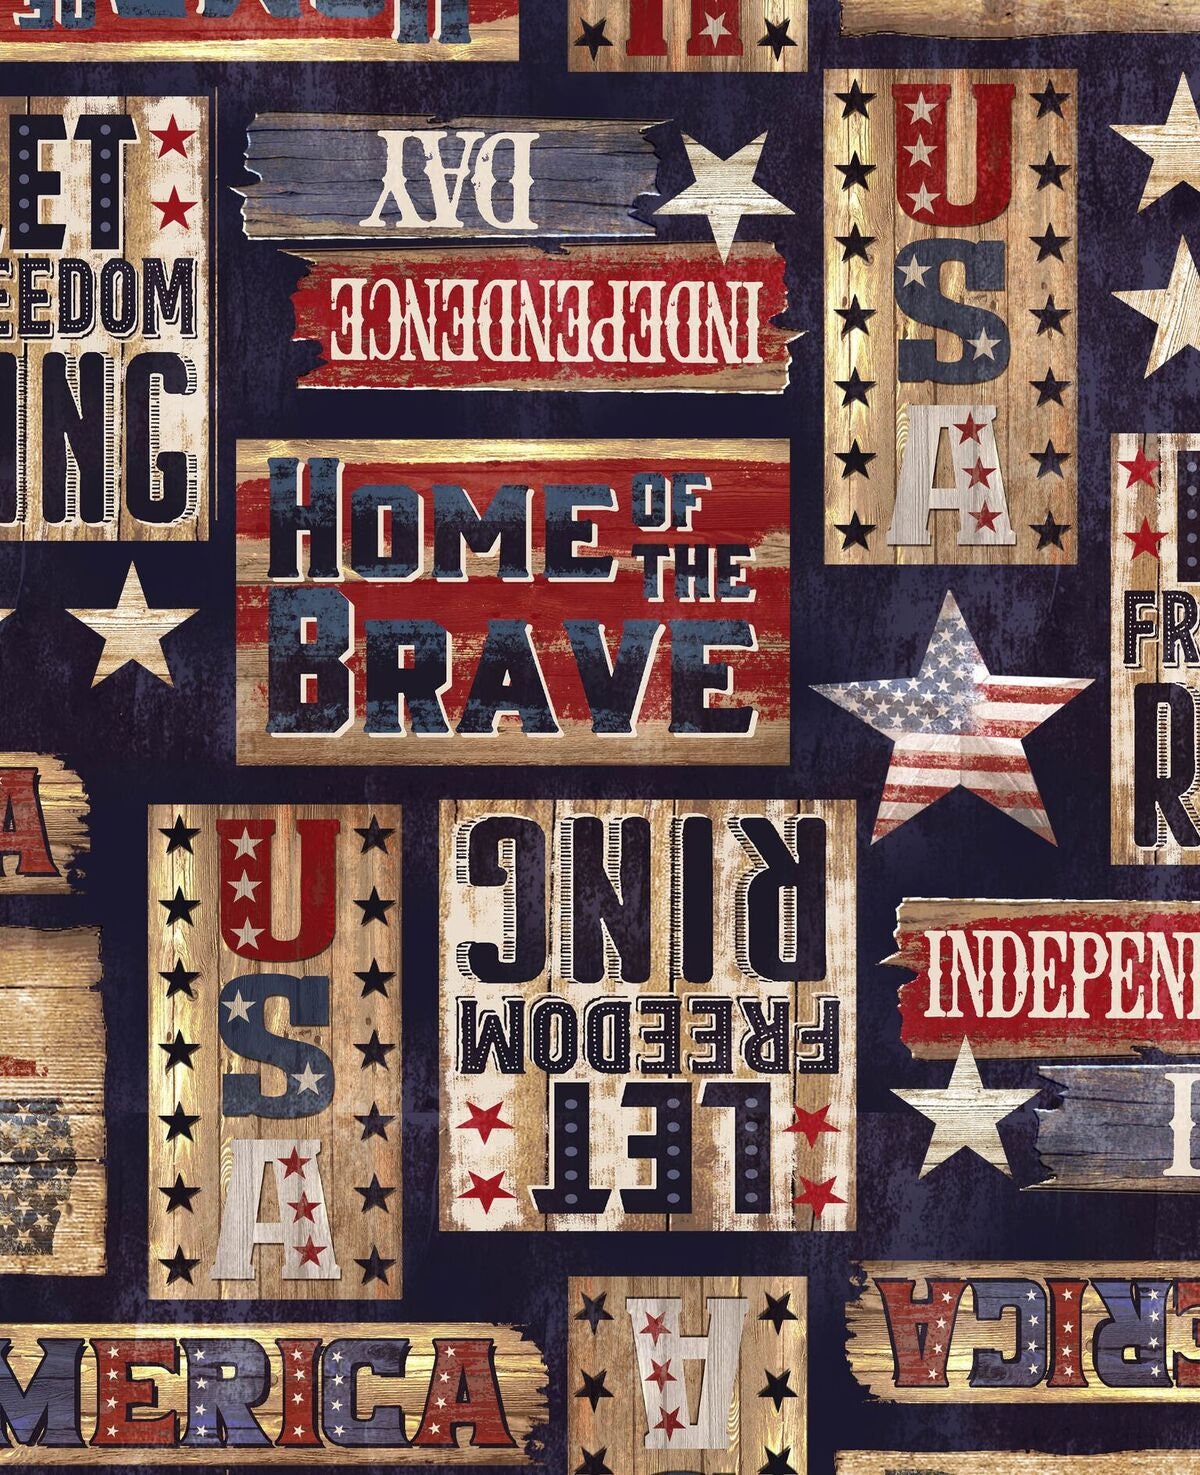 Let Freedom Ring Patriotic Rustic Signs USA-C7996-NAVY Cotton Woven Fabric